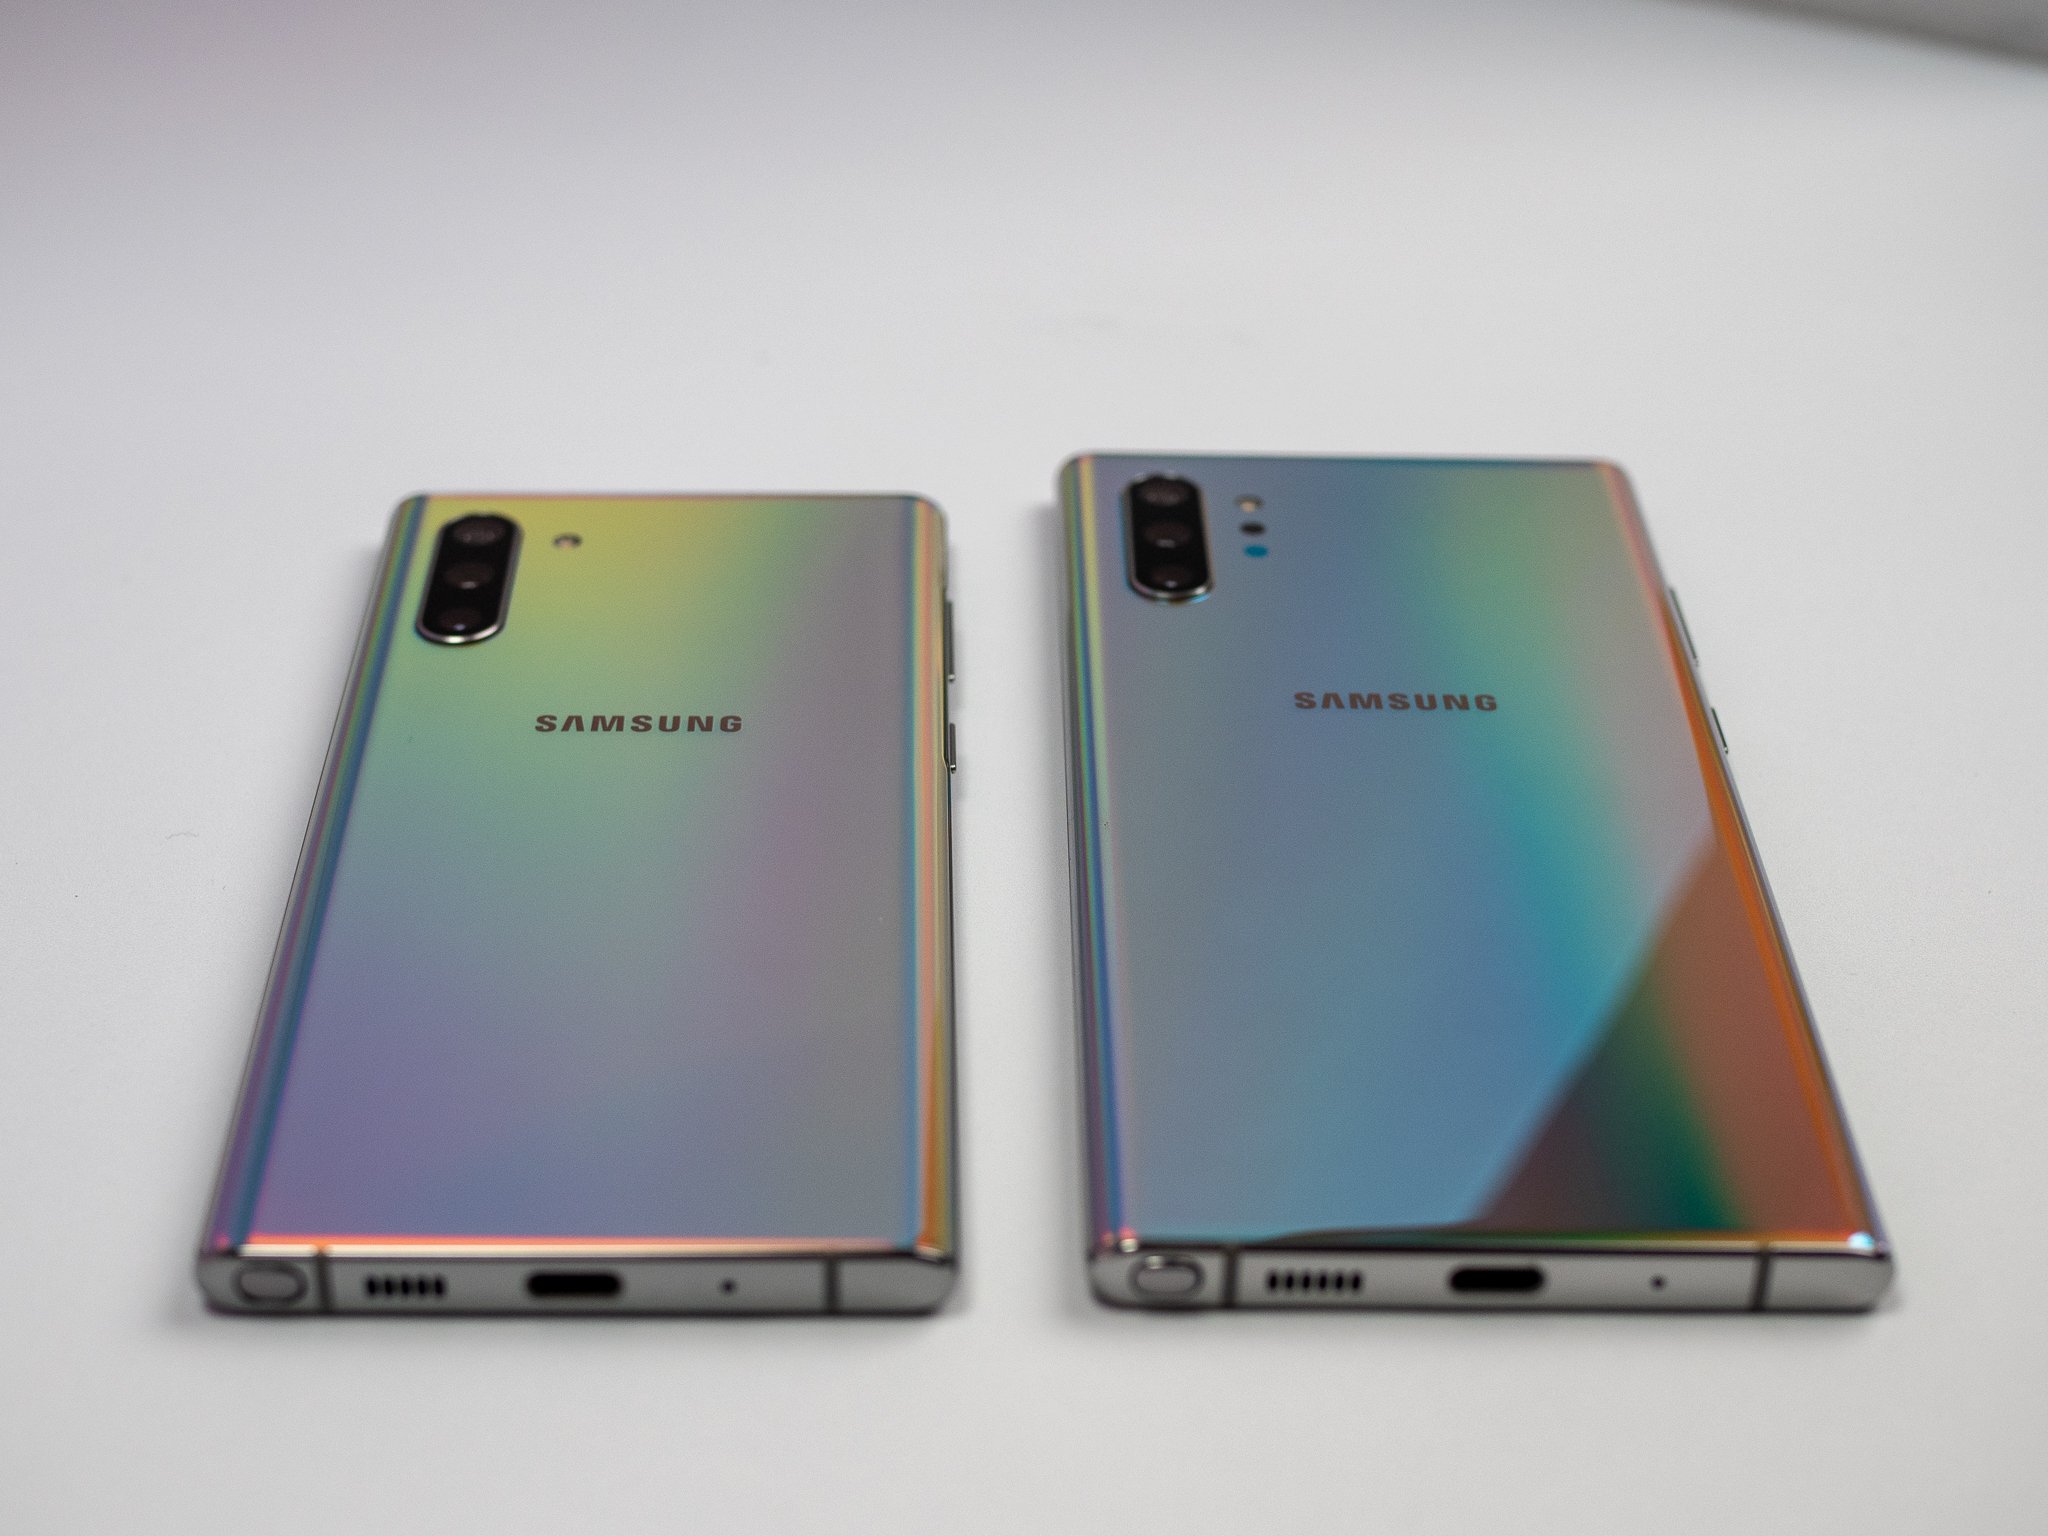 Samsung Galaxy Note 10 and Note 10+ specs: More RAM, fewer jacks